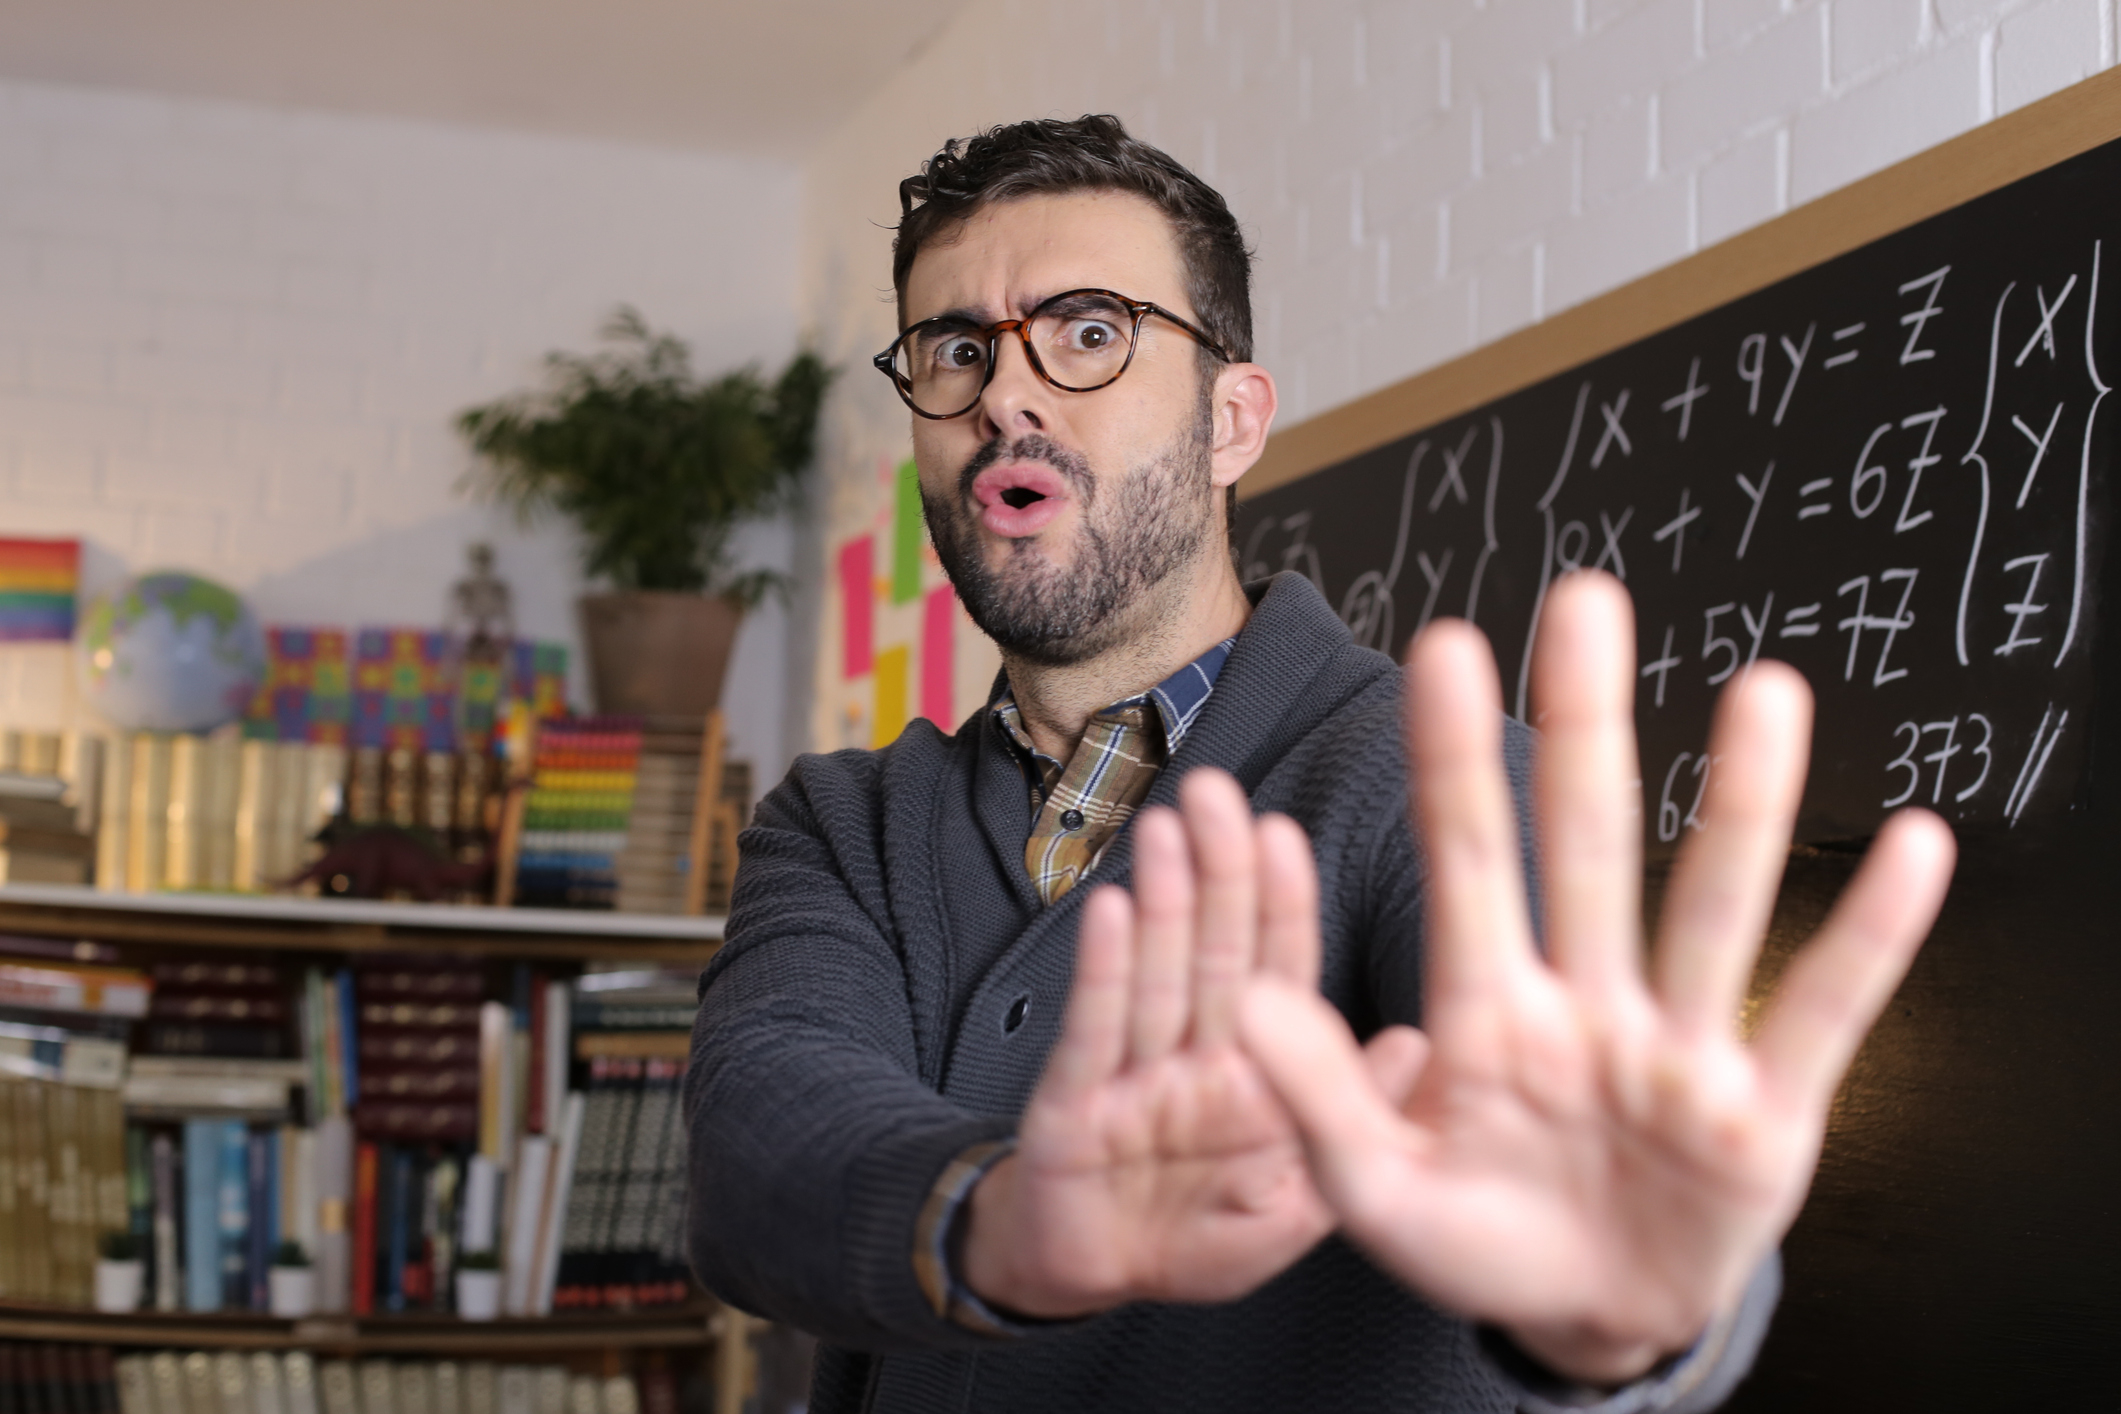 Teacher in a cozy classroom, appearing surprised or concerned, with hands raised in a stopping motion in front of a blackboard with math equations